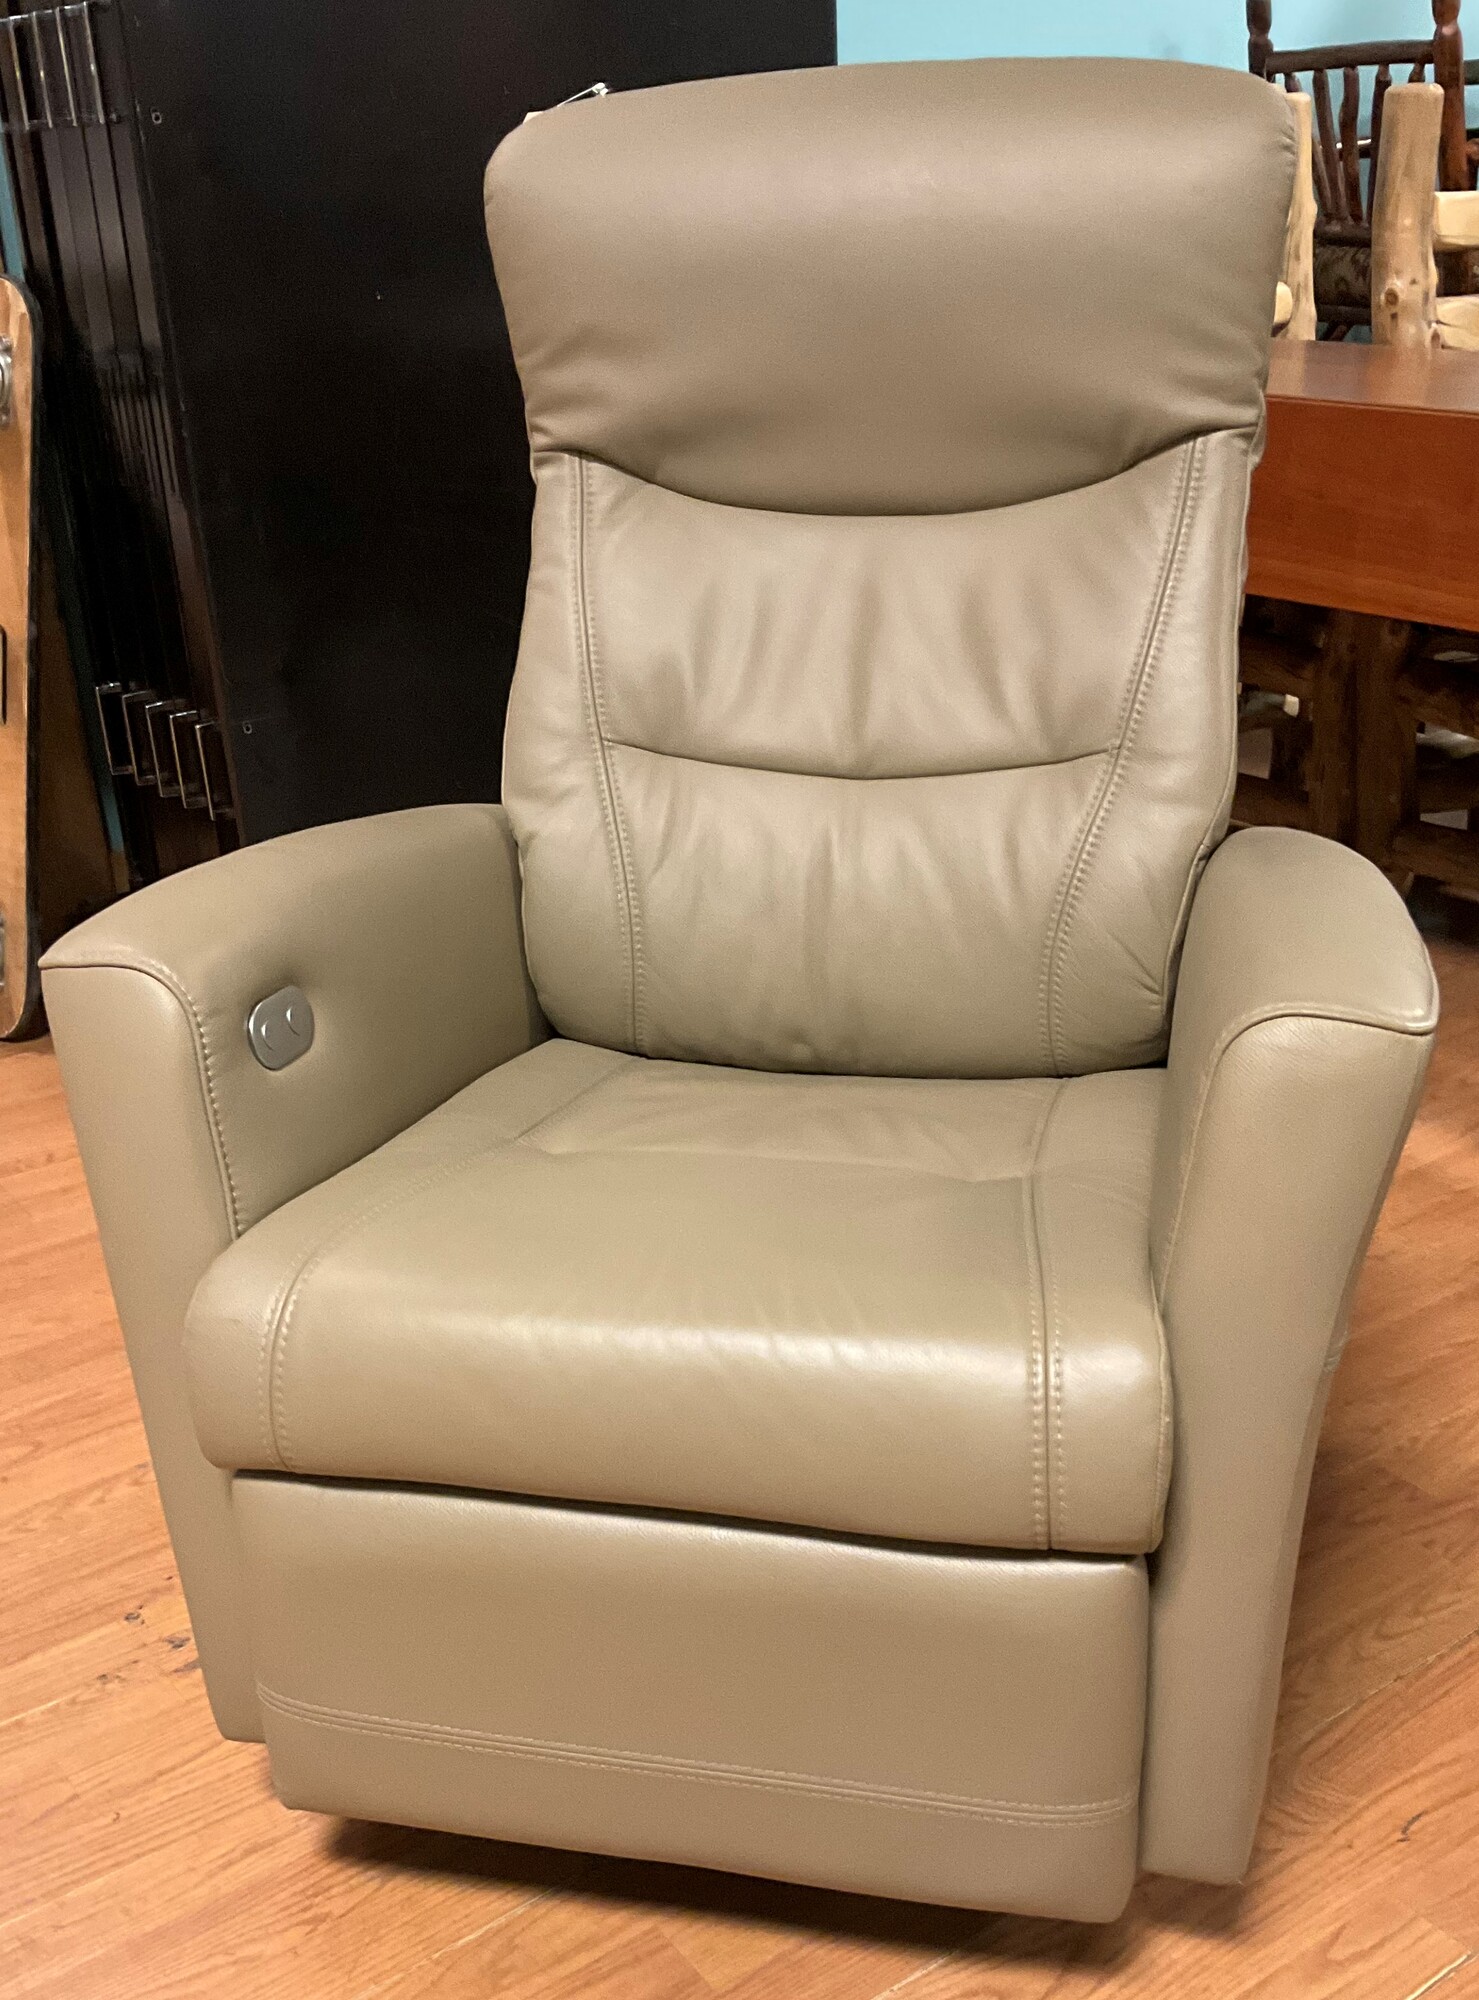 Fjords Electric Recliner
Tan, Leather
41.5in(H) 31in(W) 29in(D)